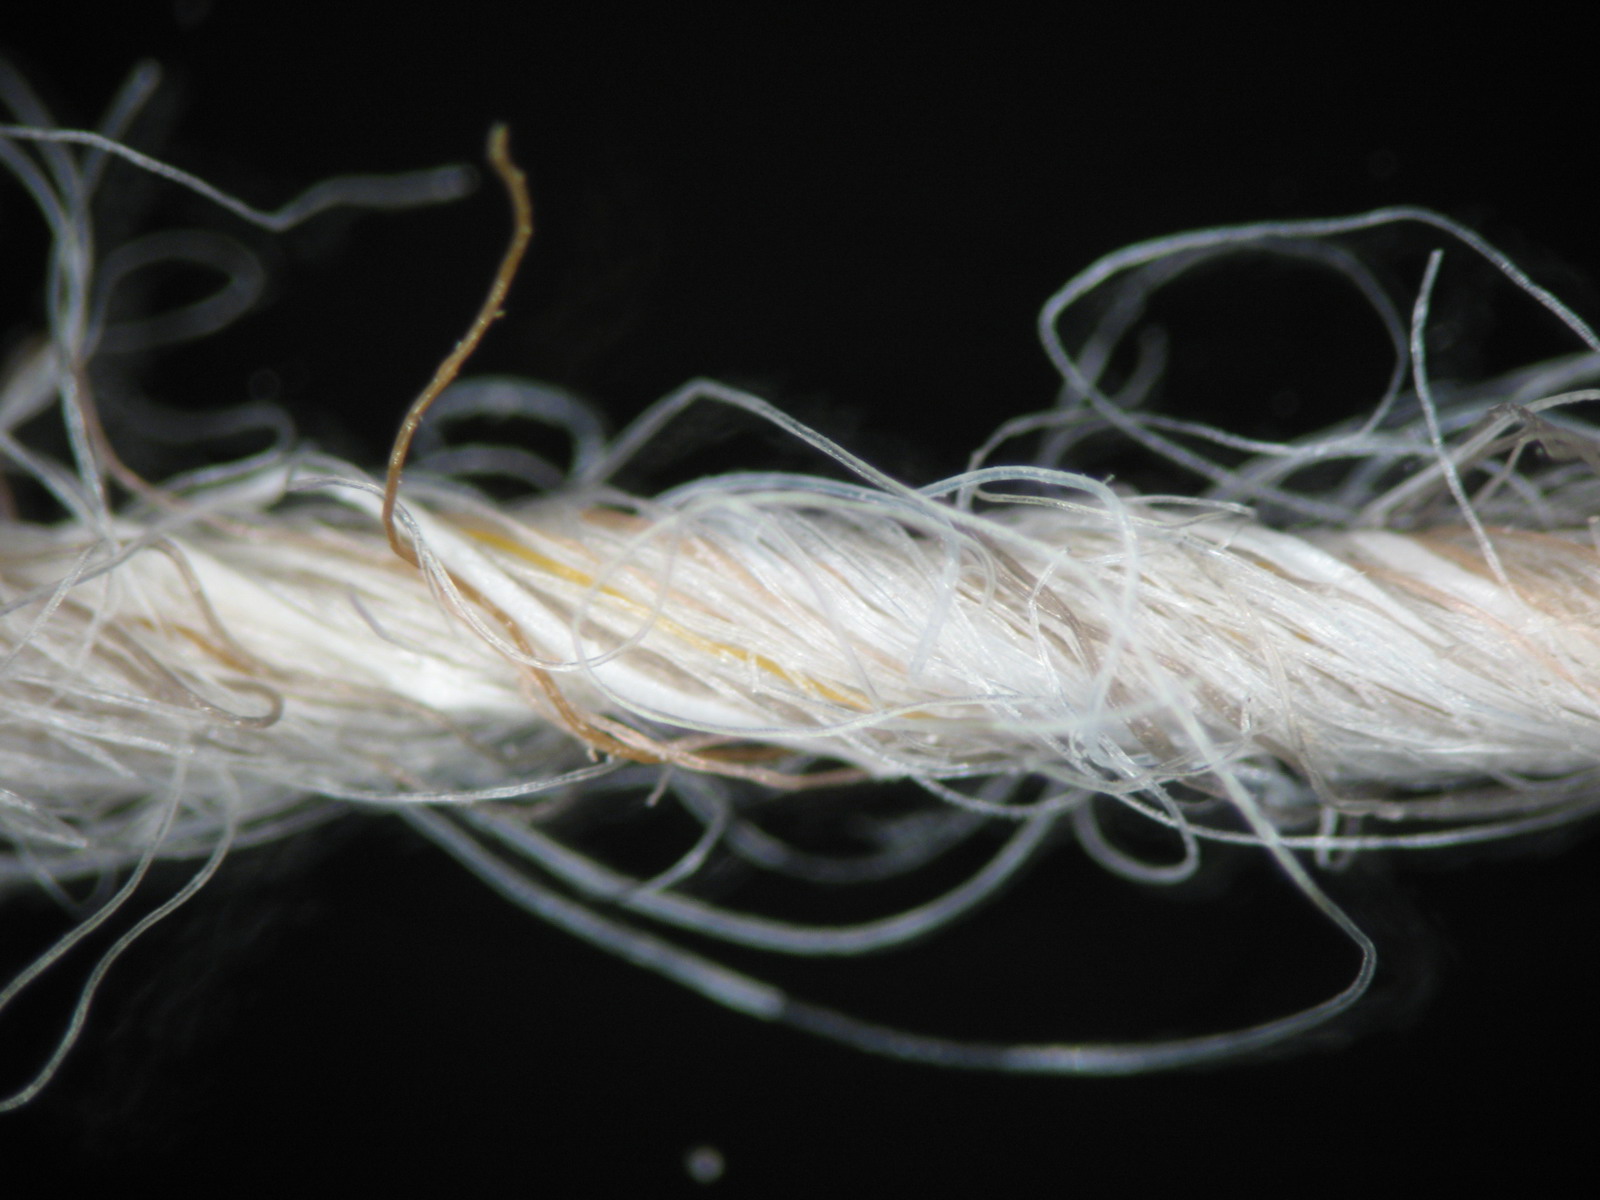 A magnified view of a section of yarn